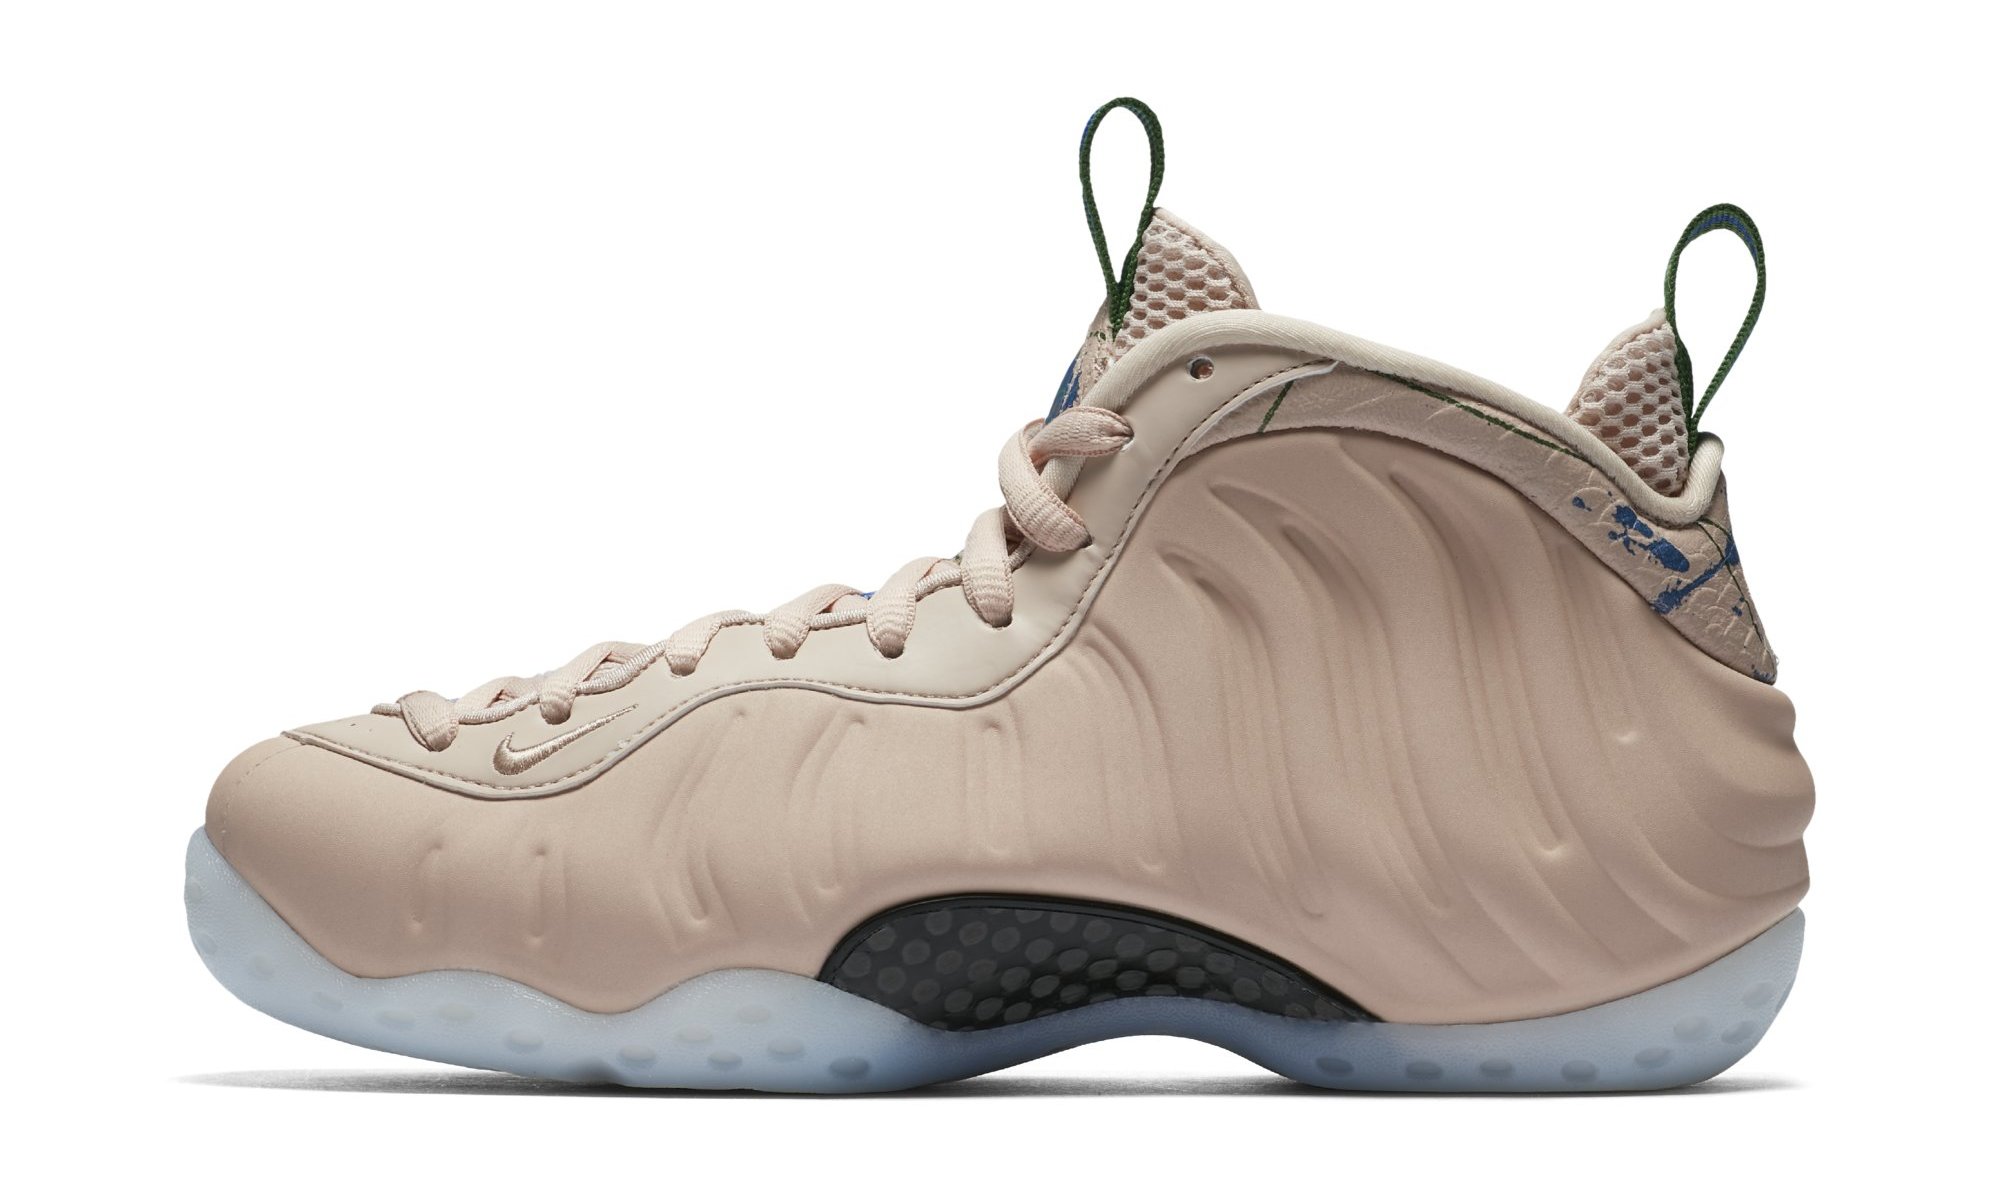 Nike Air Foamposite One Particle Beige